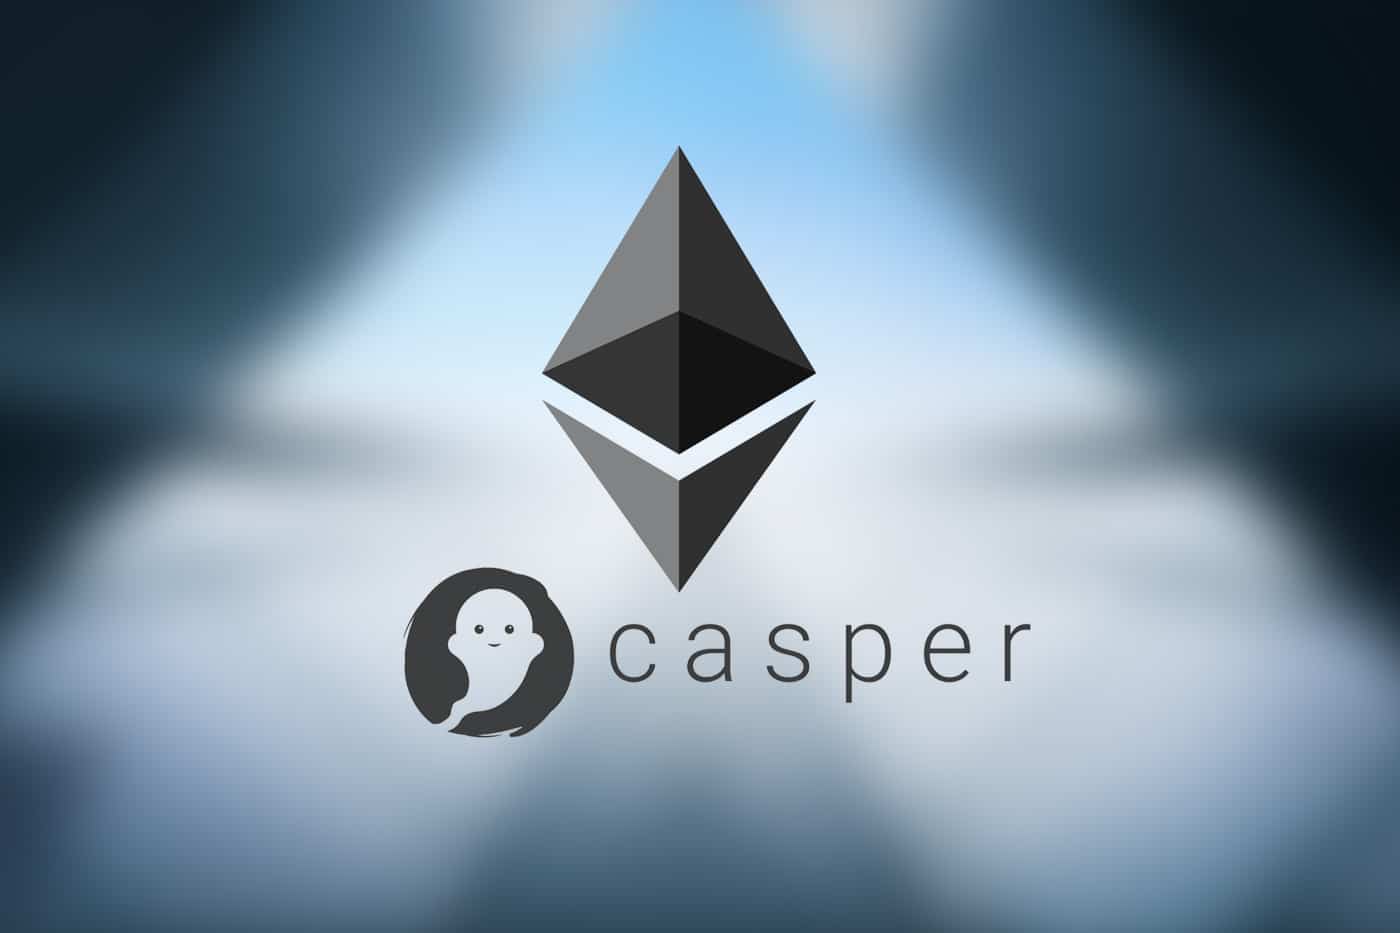 Ethereum casper release date 2017 hong kong cryptocurrency exchange limited